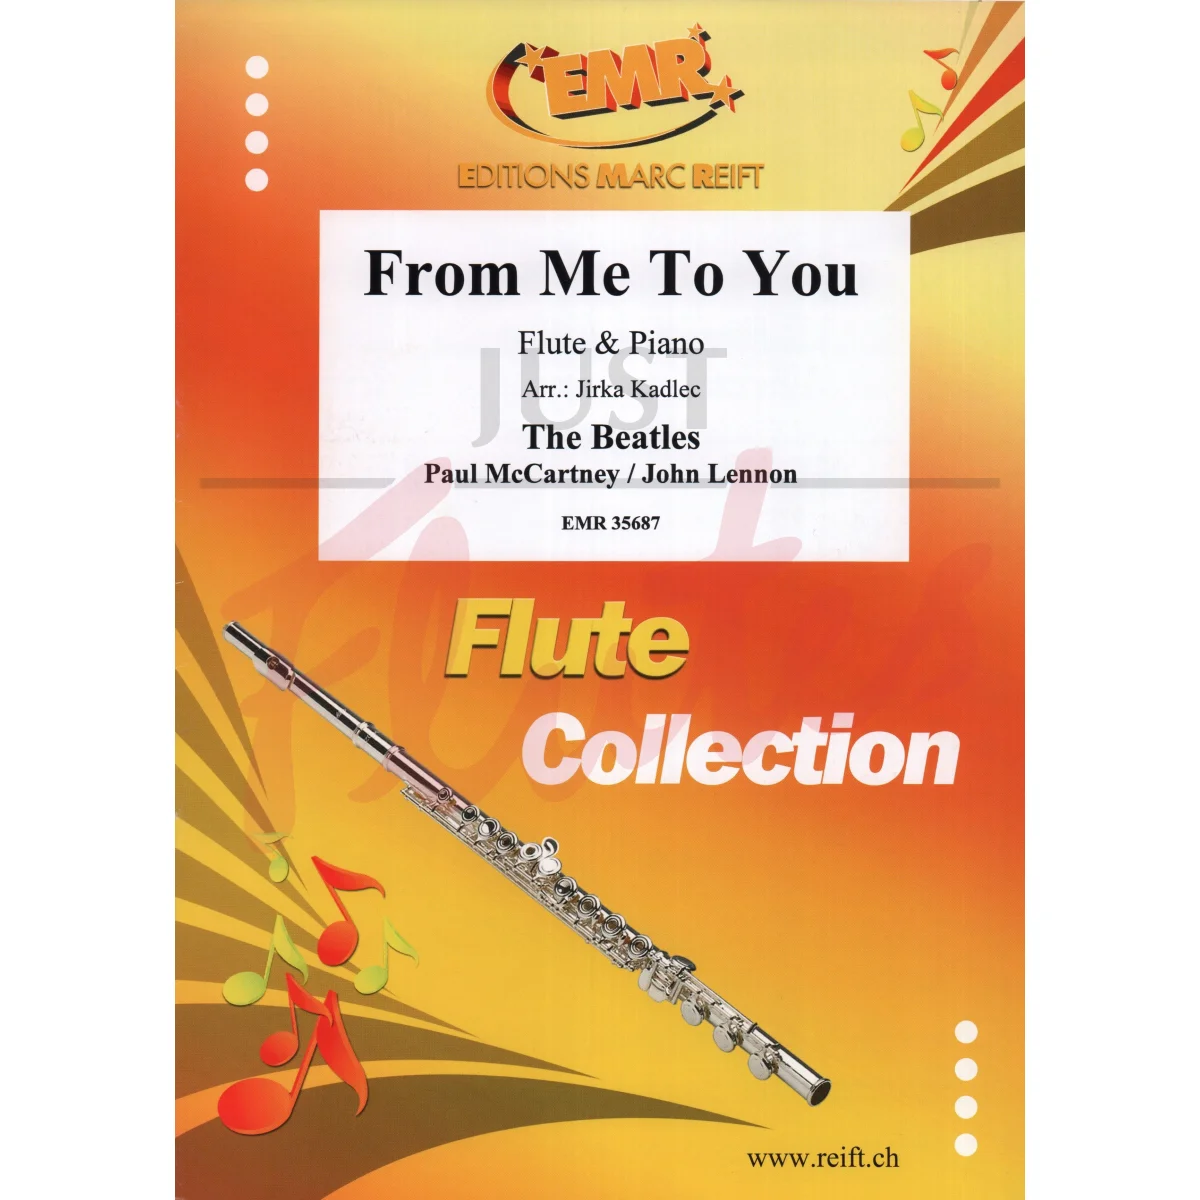 From Me to You for Flute and Piano